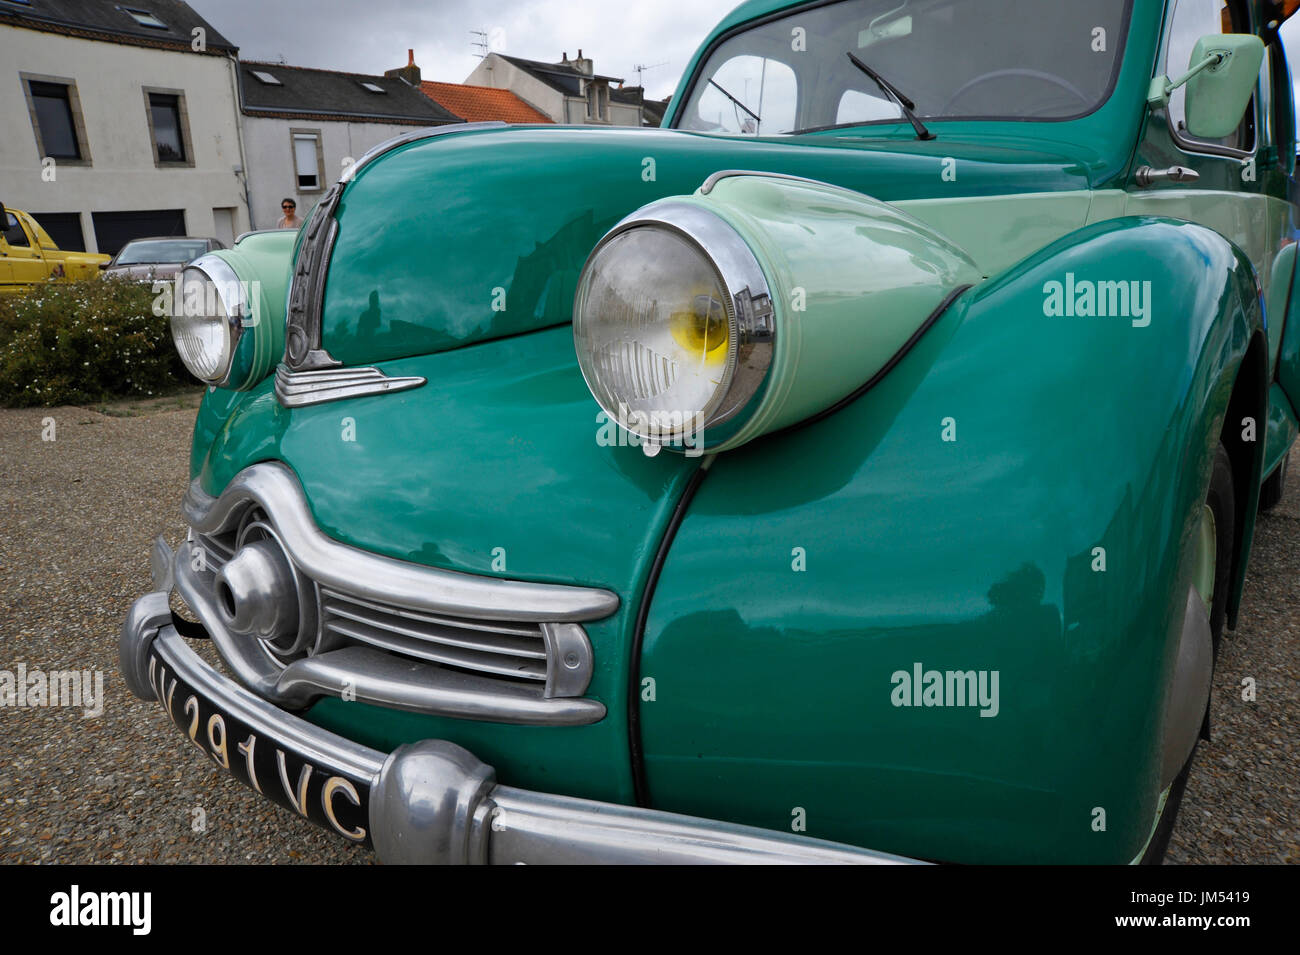 Panhard Dyna estate car on display at the historic grand prix Bressuire France Stock Photo